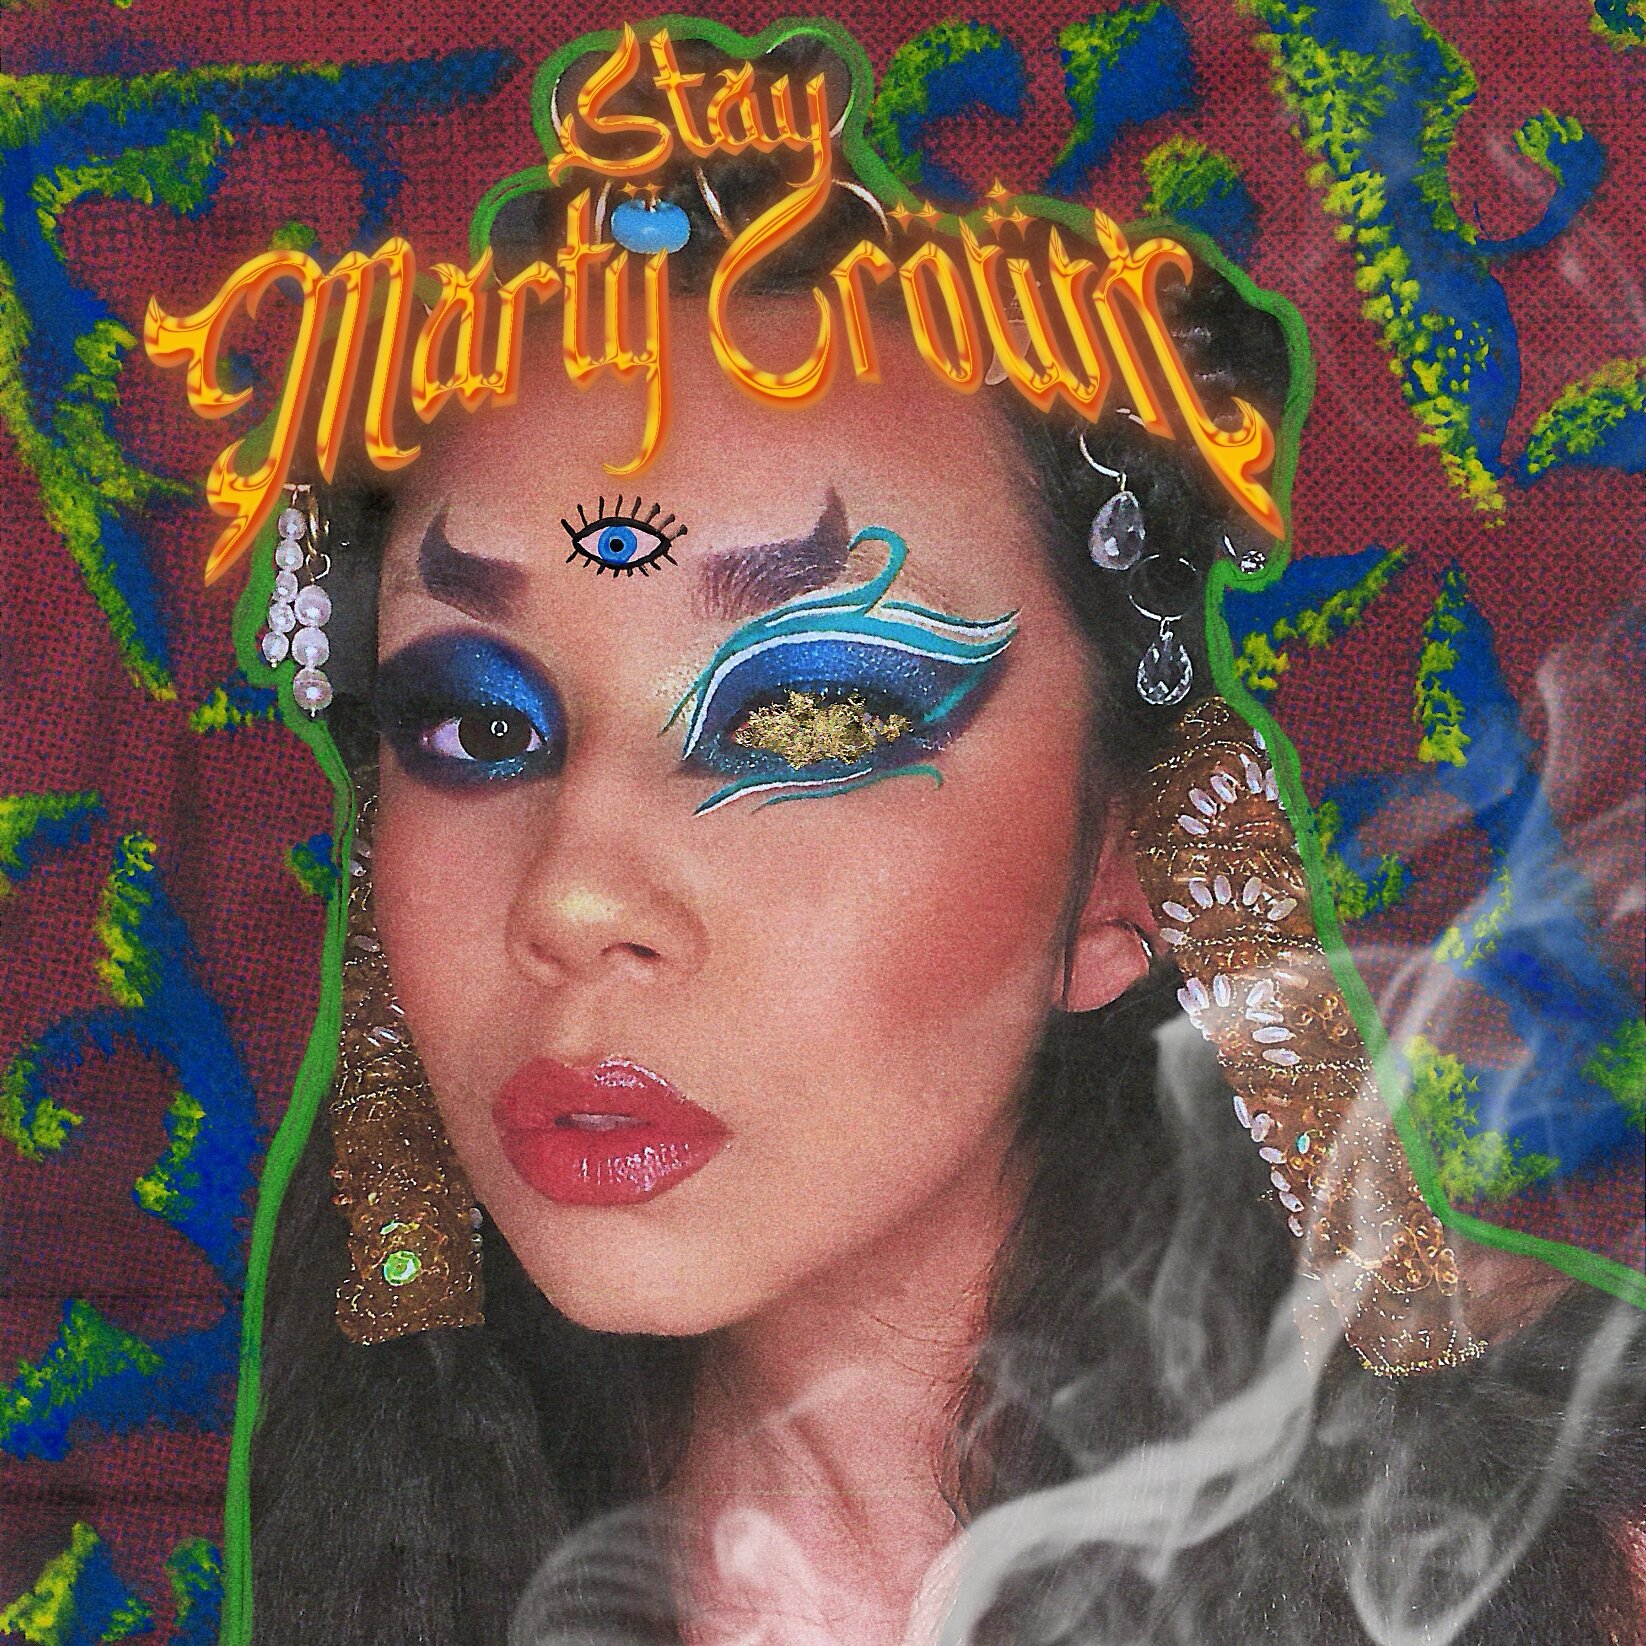 Marty Crown - Stay